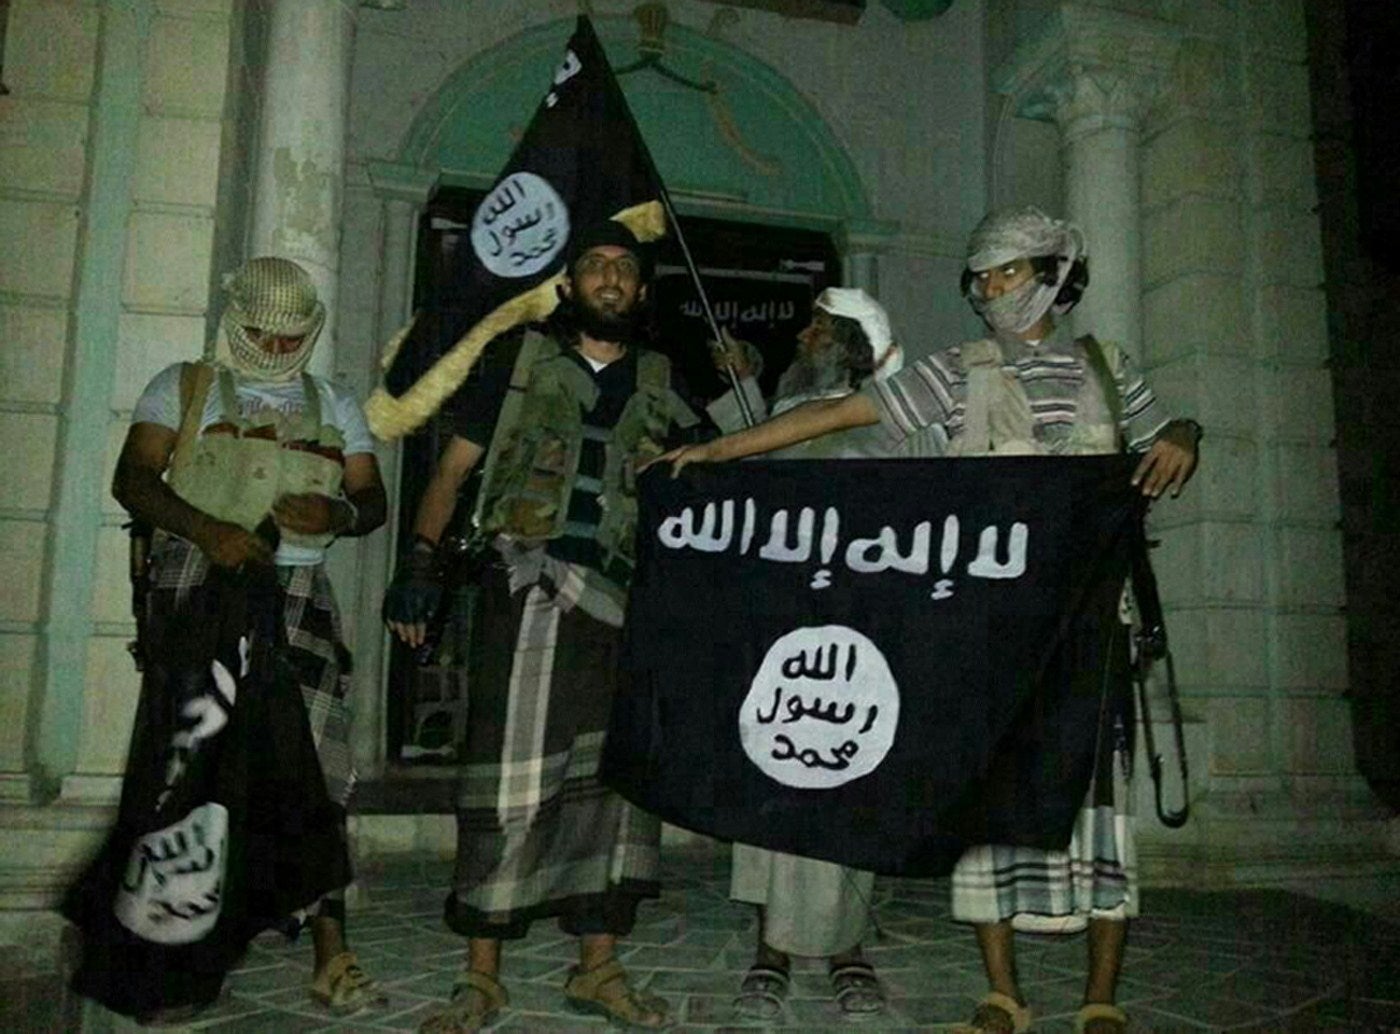 Al-Qaeda militants pose with their flag (the same one used by Isis) in Yemeni city of Seiyun